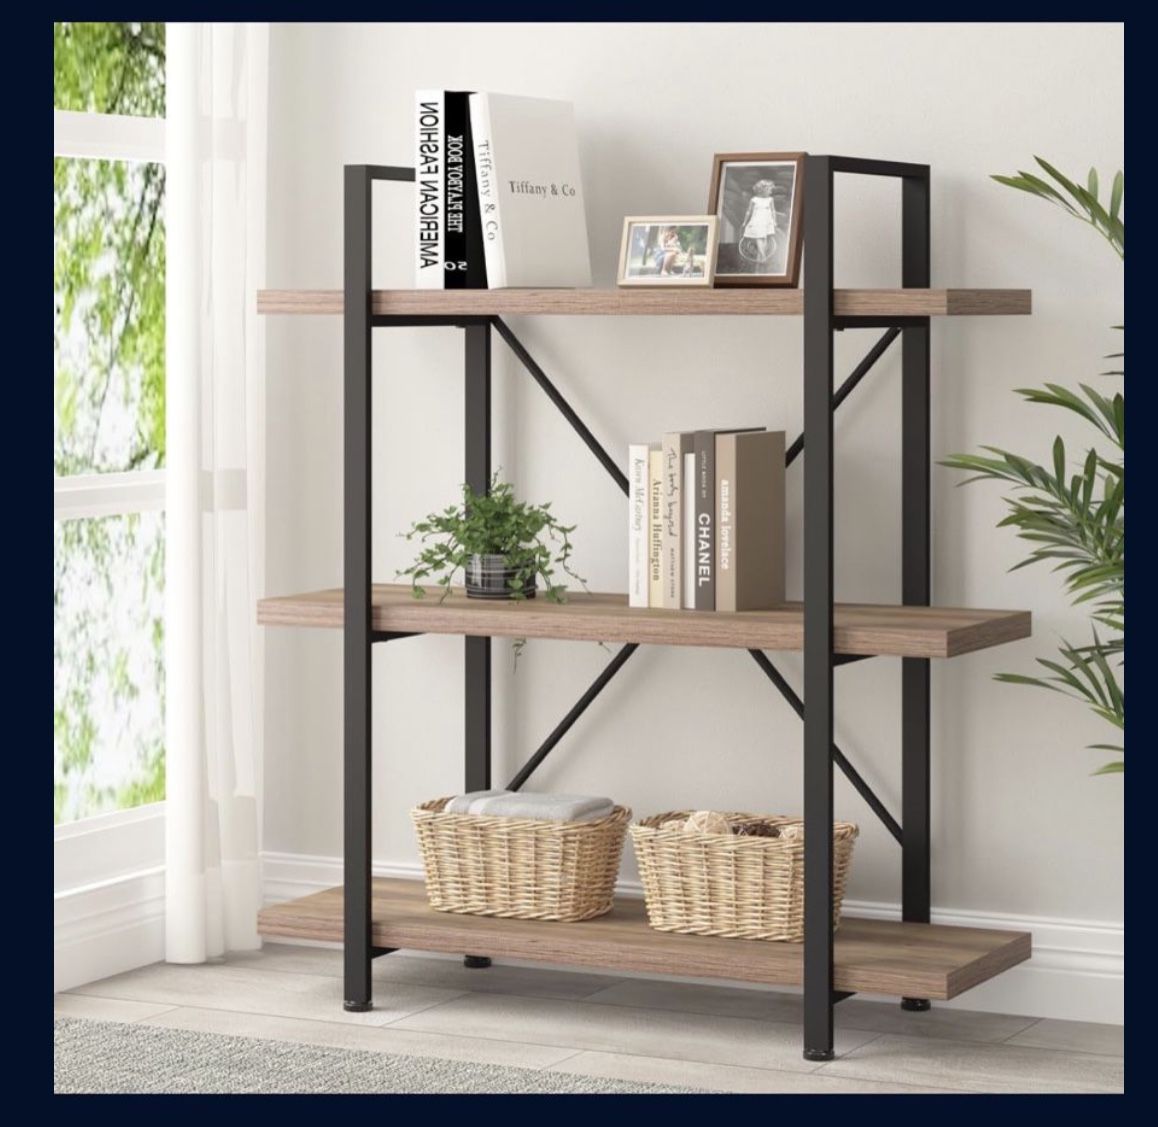 HSH Industrial 3 Tier Book Shelf, Modern Small Wood and Metal 3 Shelf Bookcase